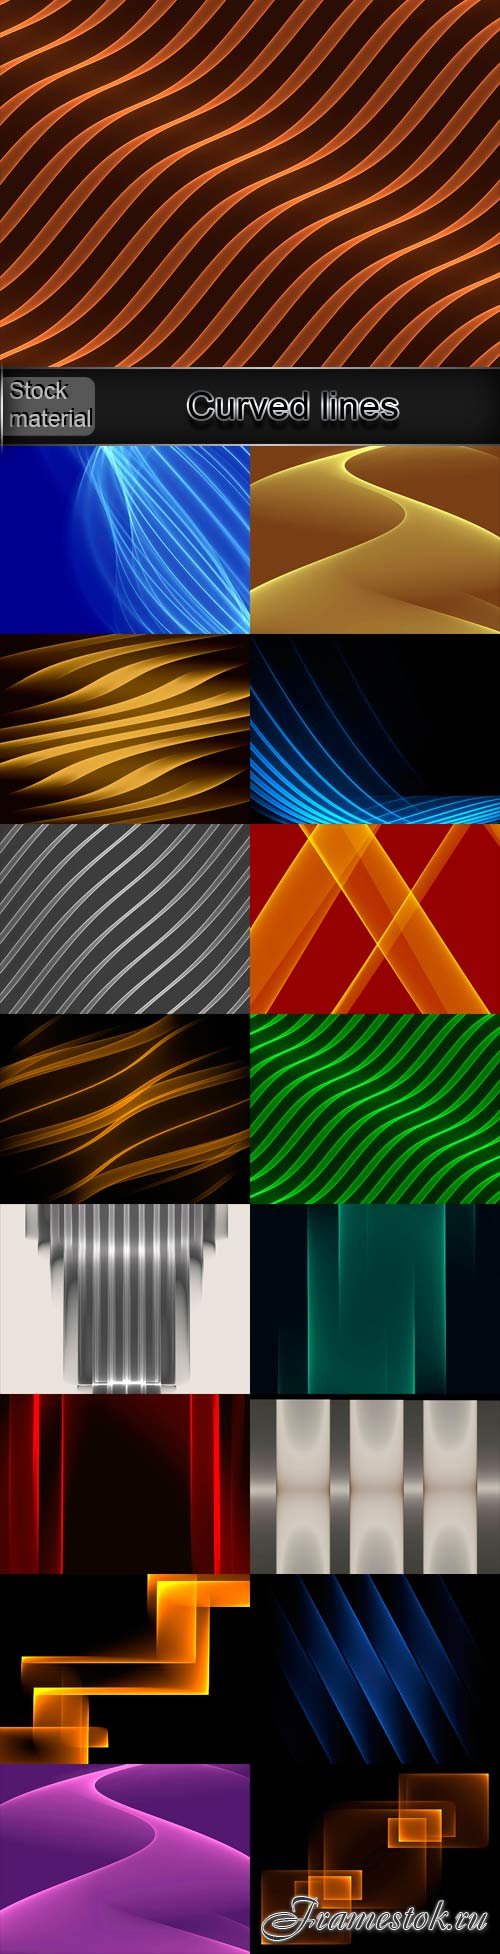 Curved lines abstract backgrounds